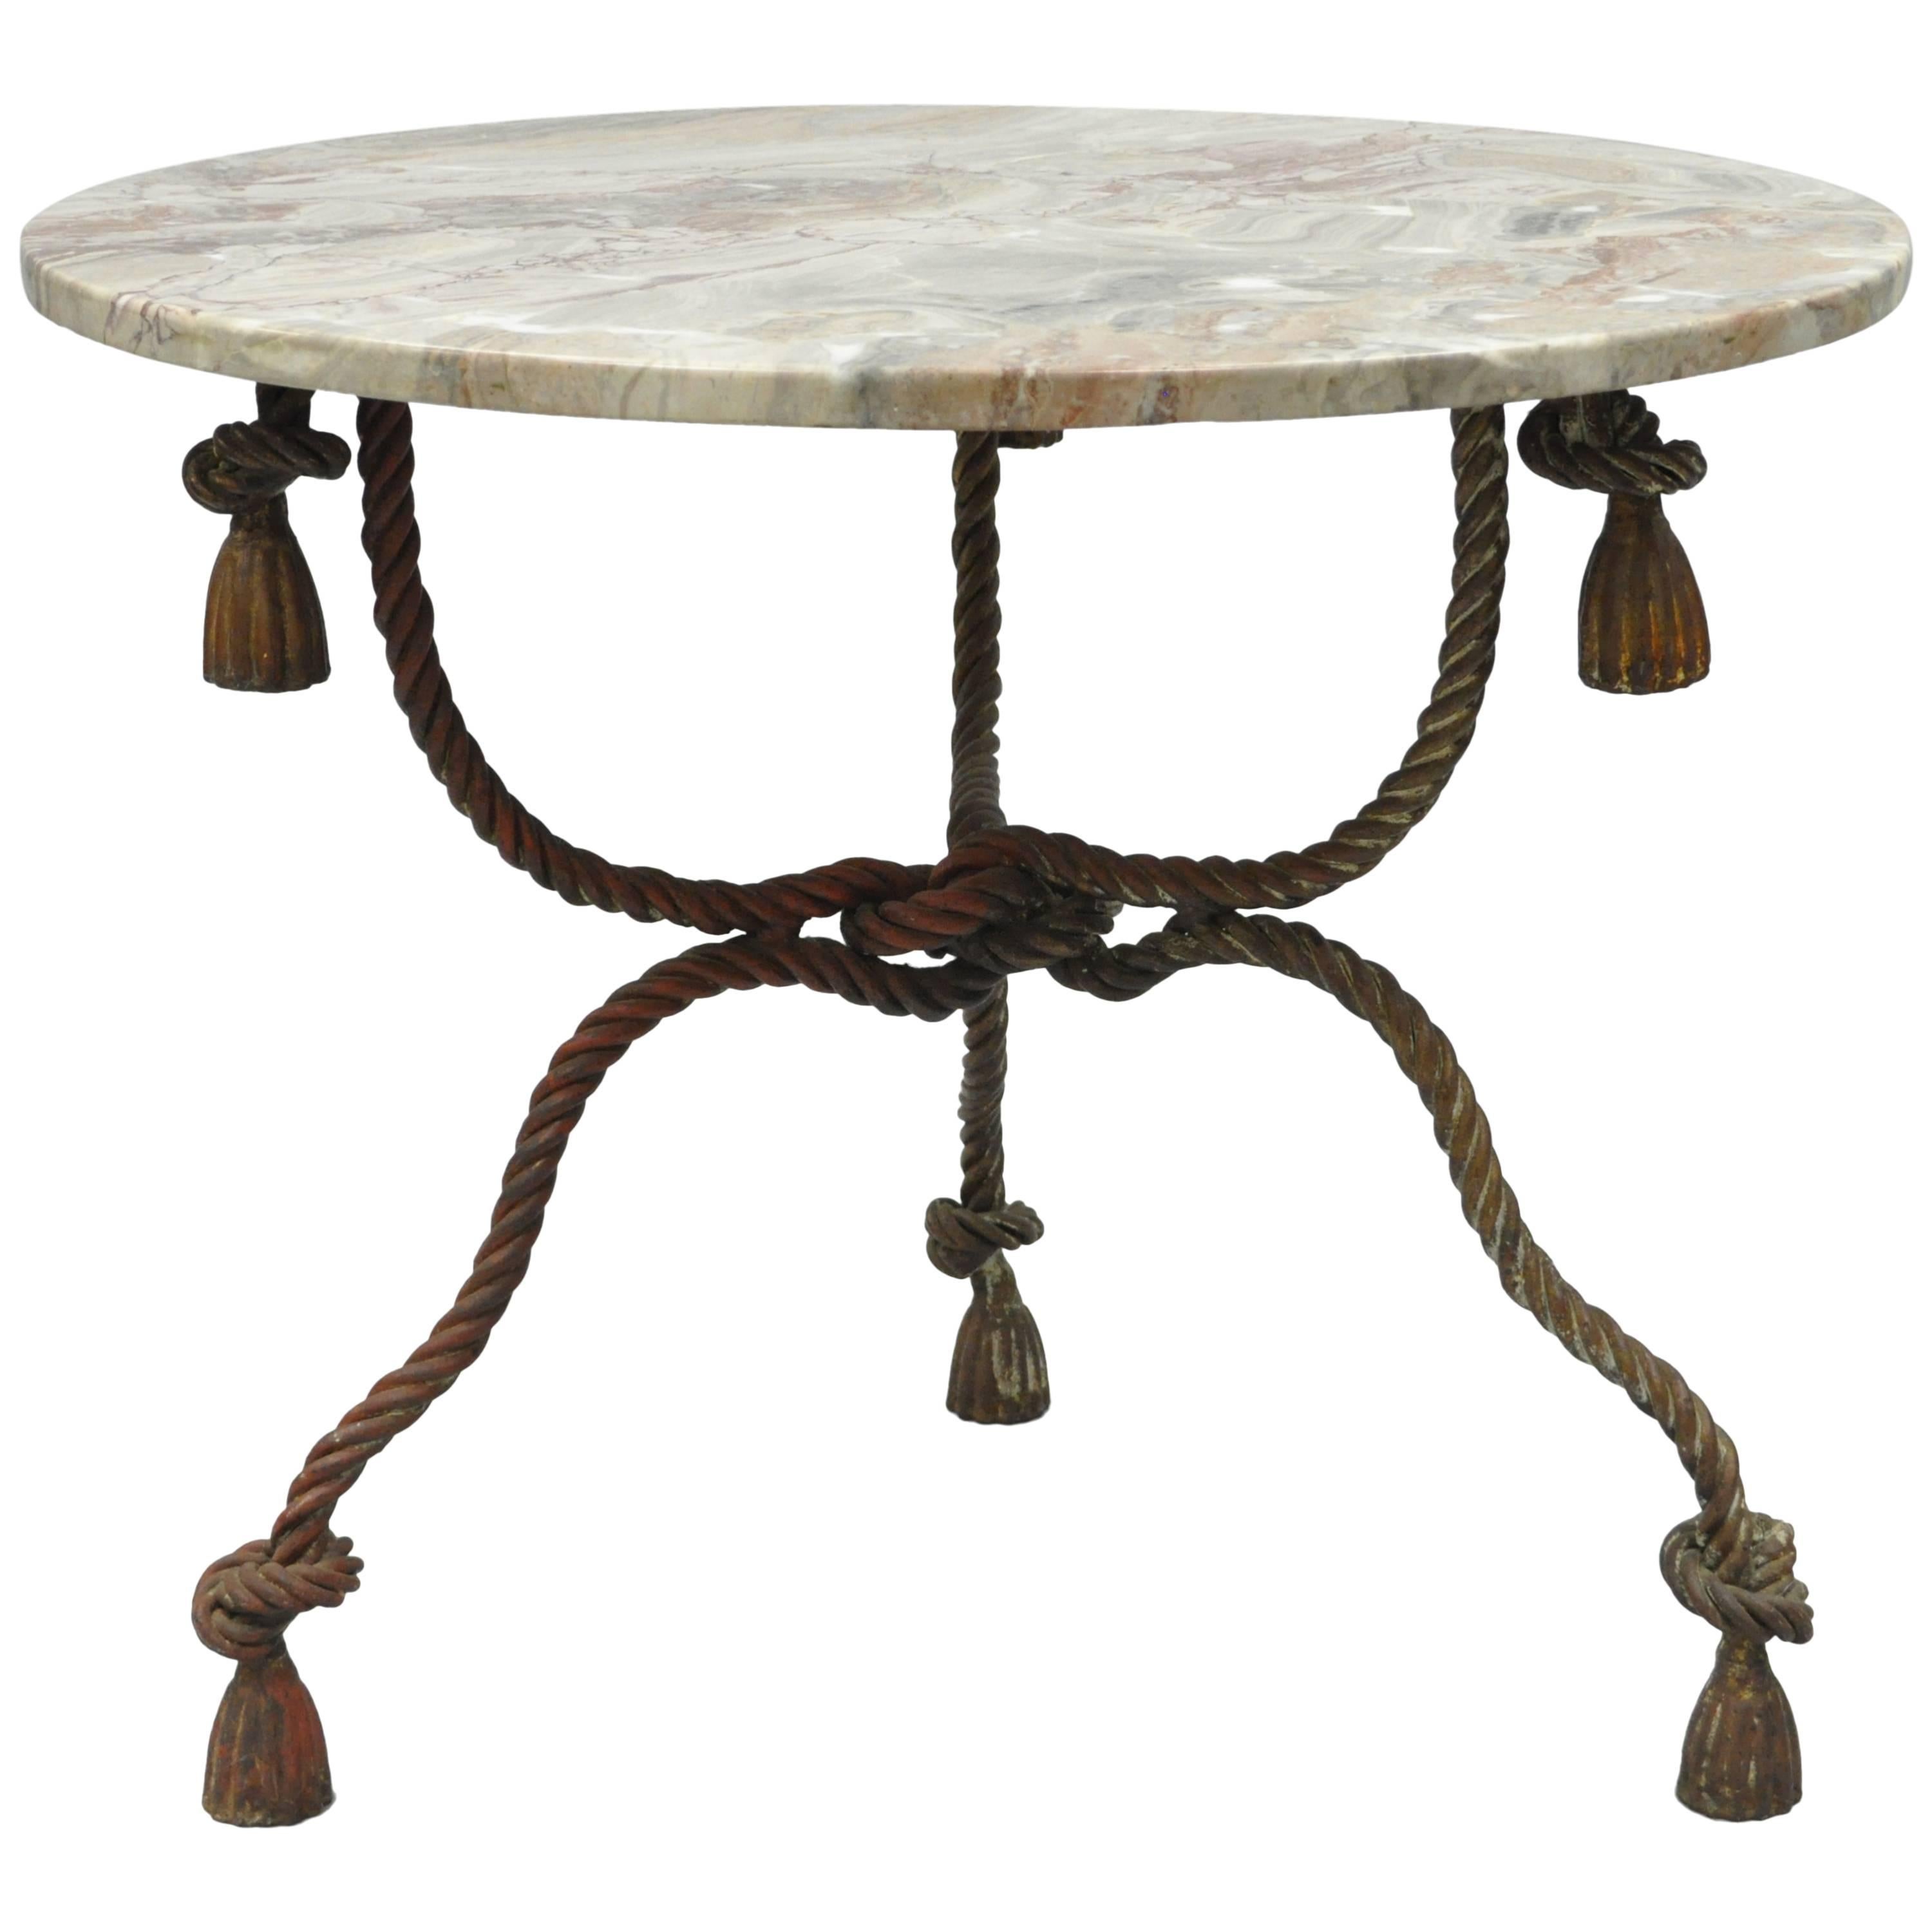 1940s Italian Marble-Top Rope Turned Round Tassel Form Iron Center Table